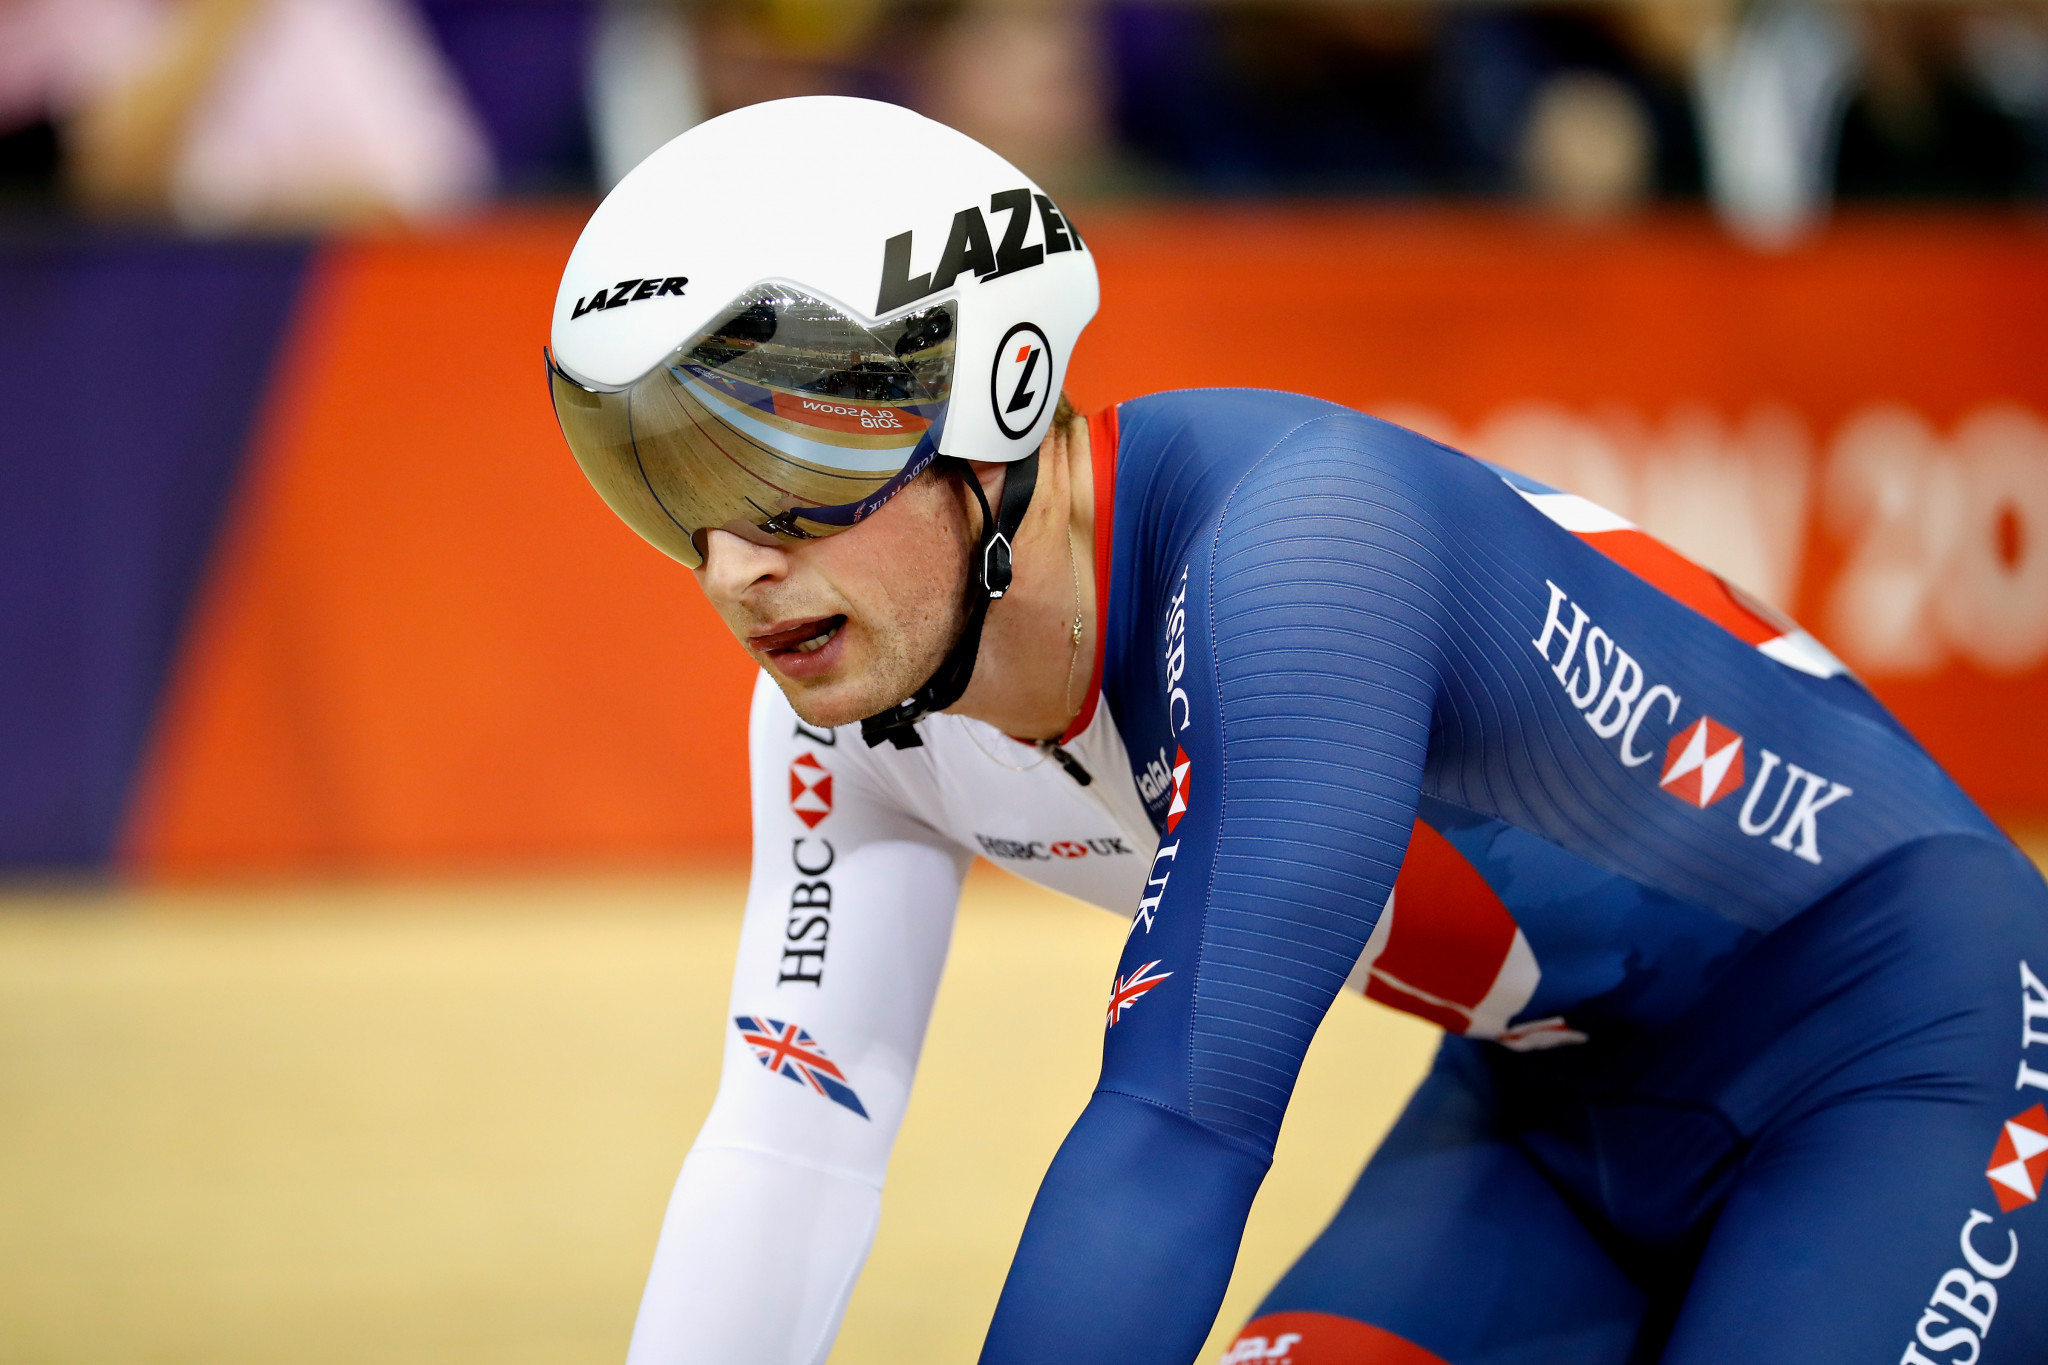 Kenny relishing London return for UCI Track Cycling World Cup